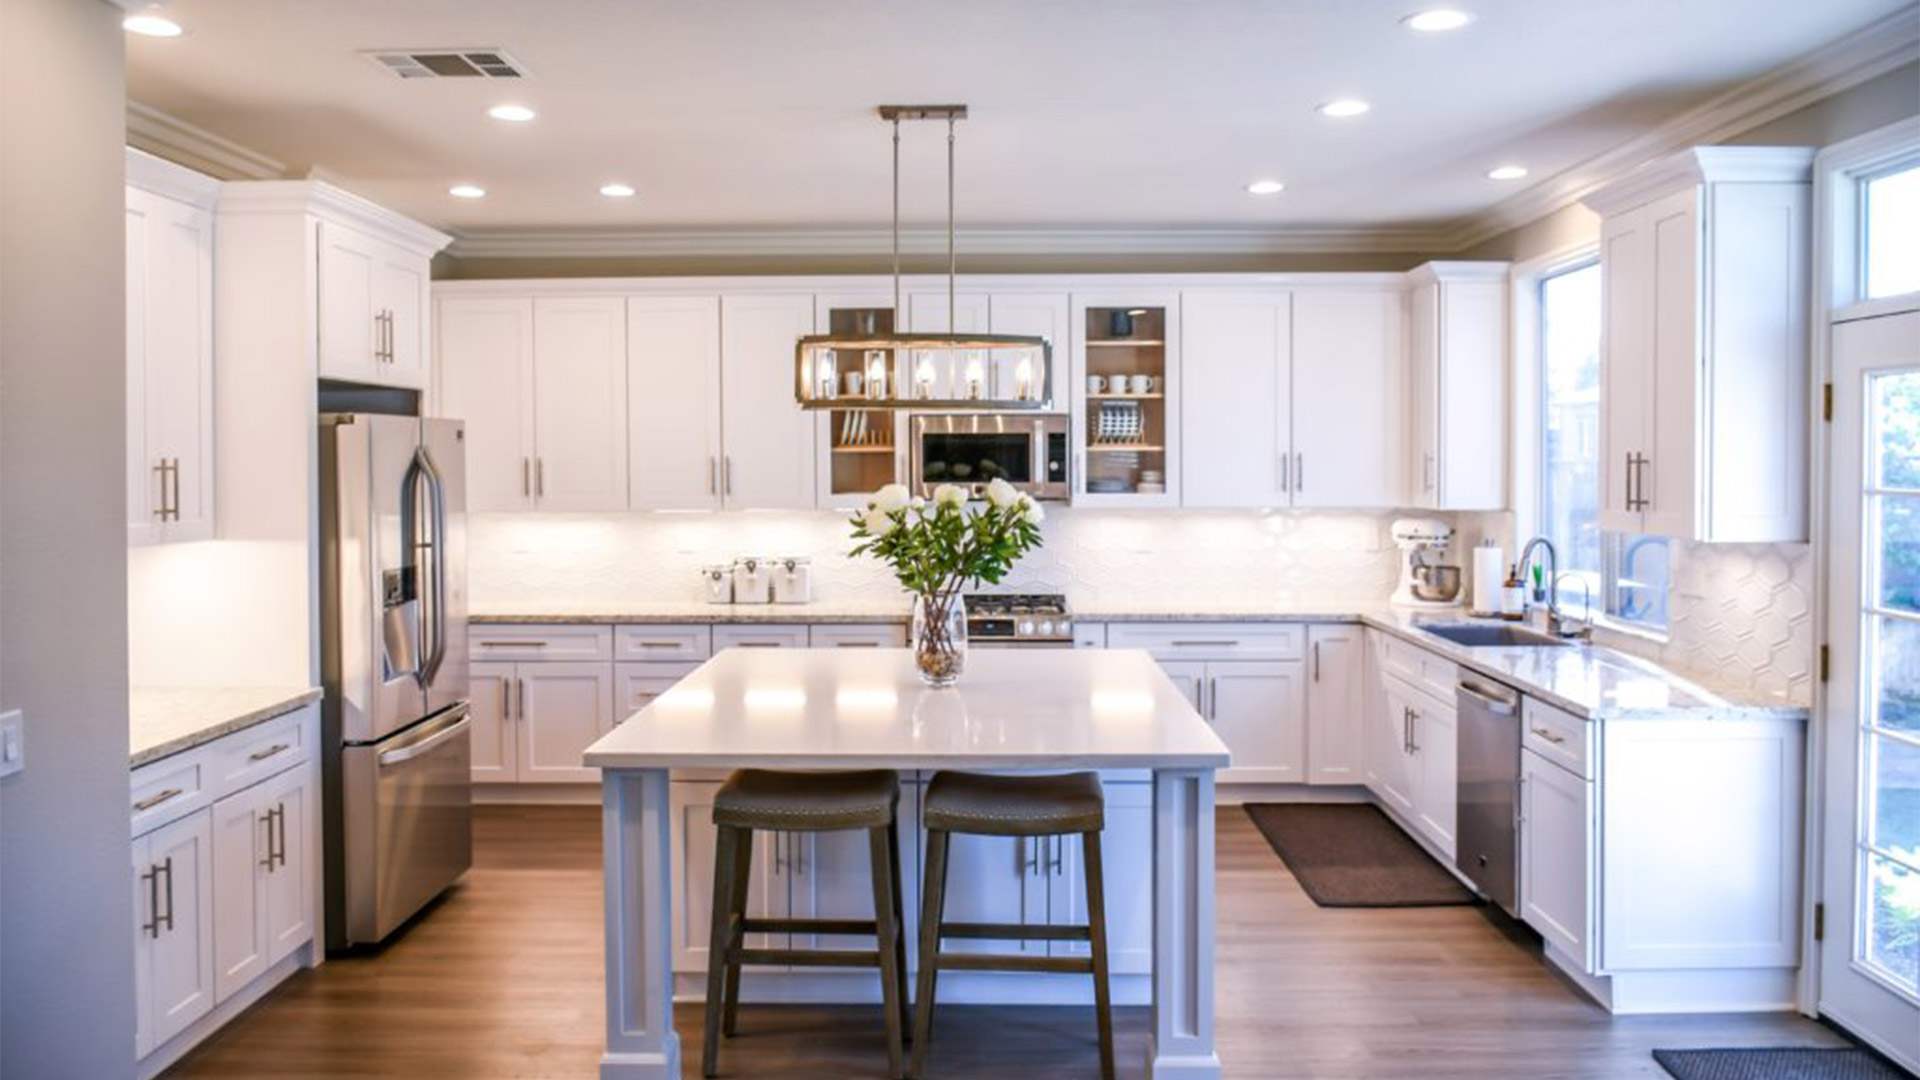 luxury kitchen interiors with recessed lighting and under cabinets installed ashland ma